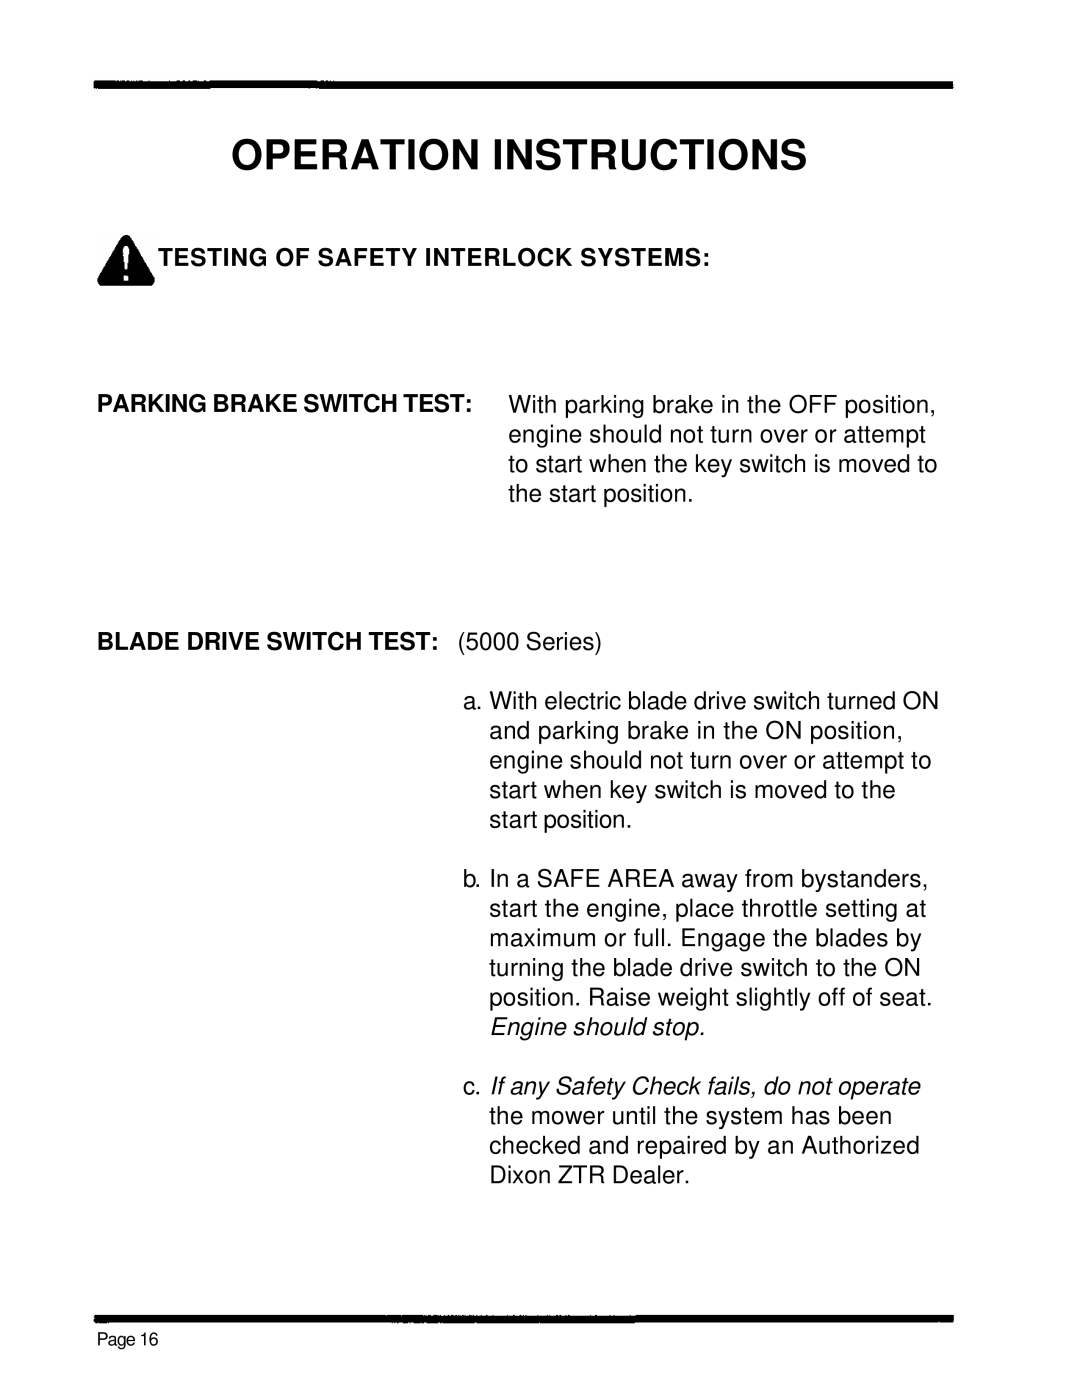 Dixon manual Testing Of Safety Interlock Systems, BLADE DRIVE SWITCH TEST 5000 Series, Operation Instructions 